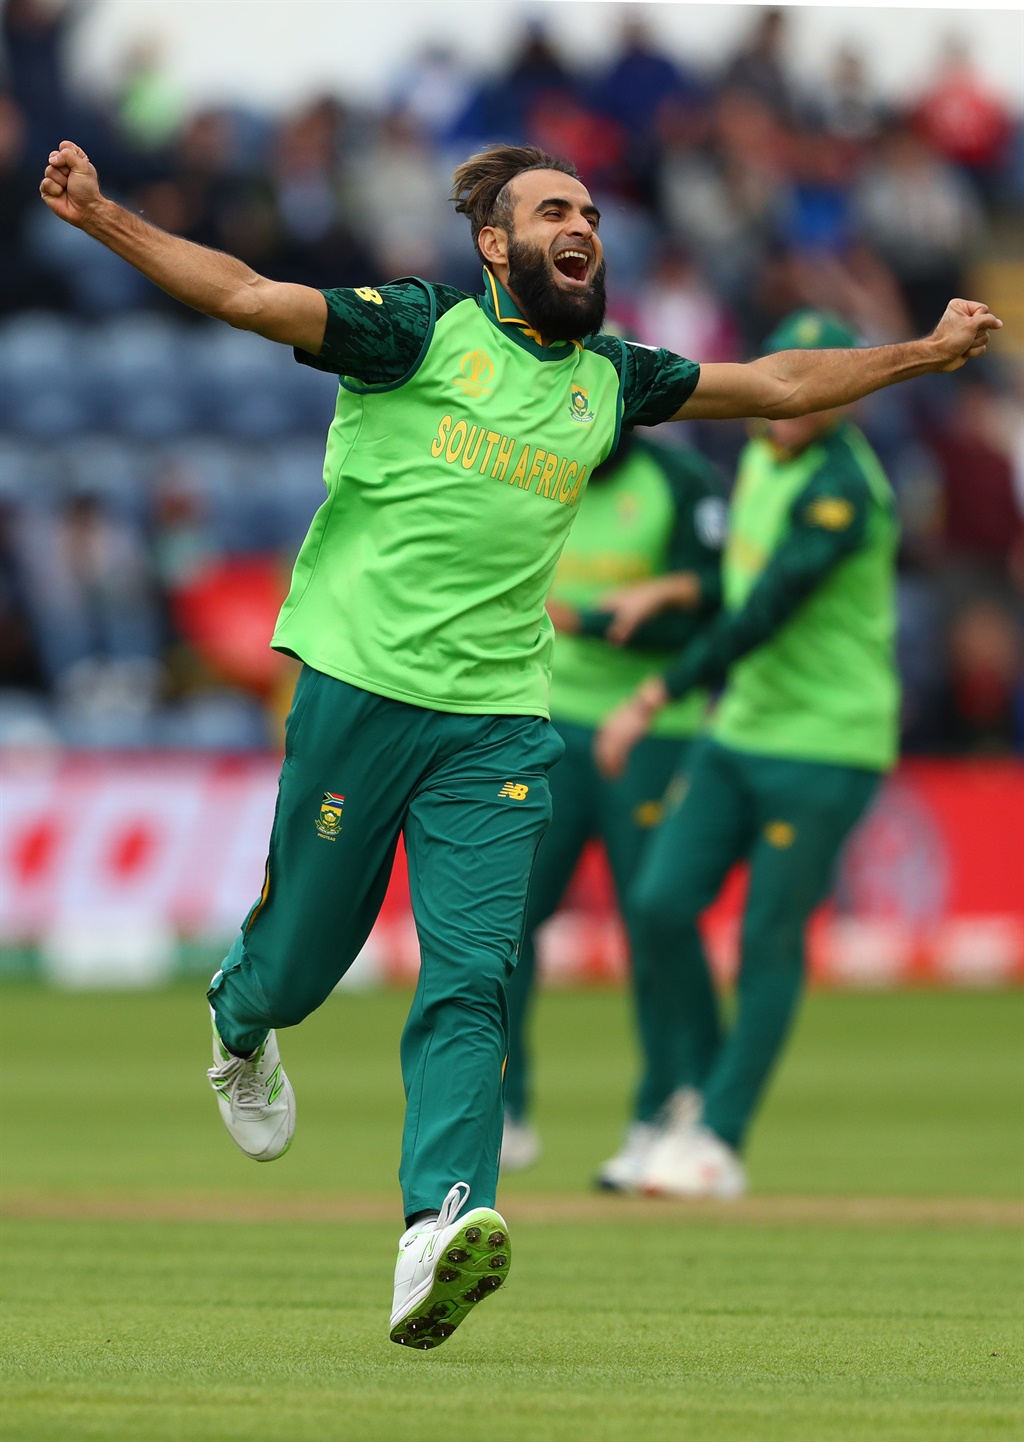 Imran Tahir of South Africa celebrates  taking a wicket.
Photo: Getty Images.